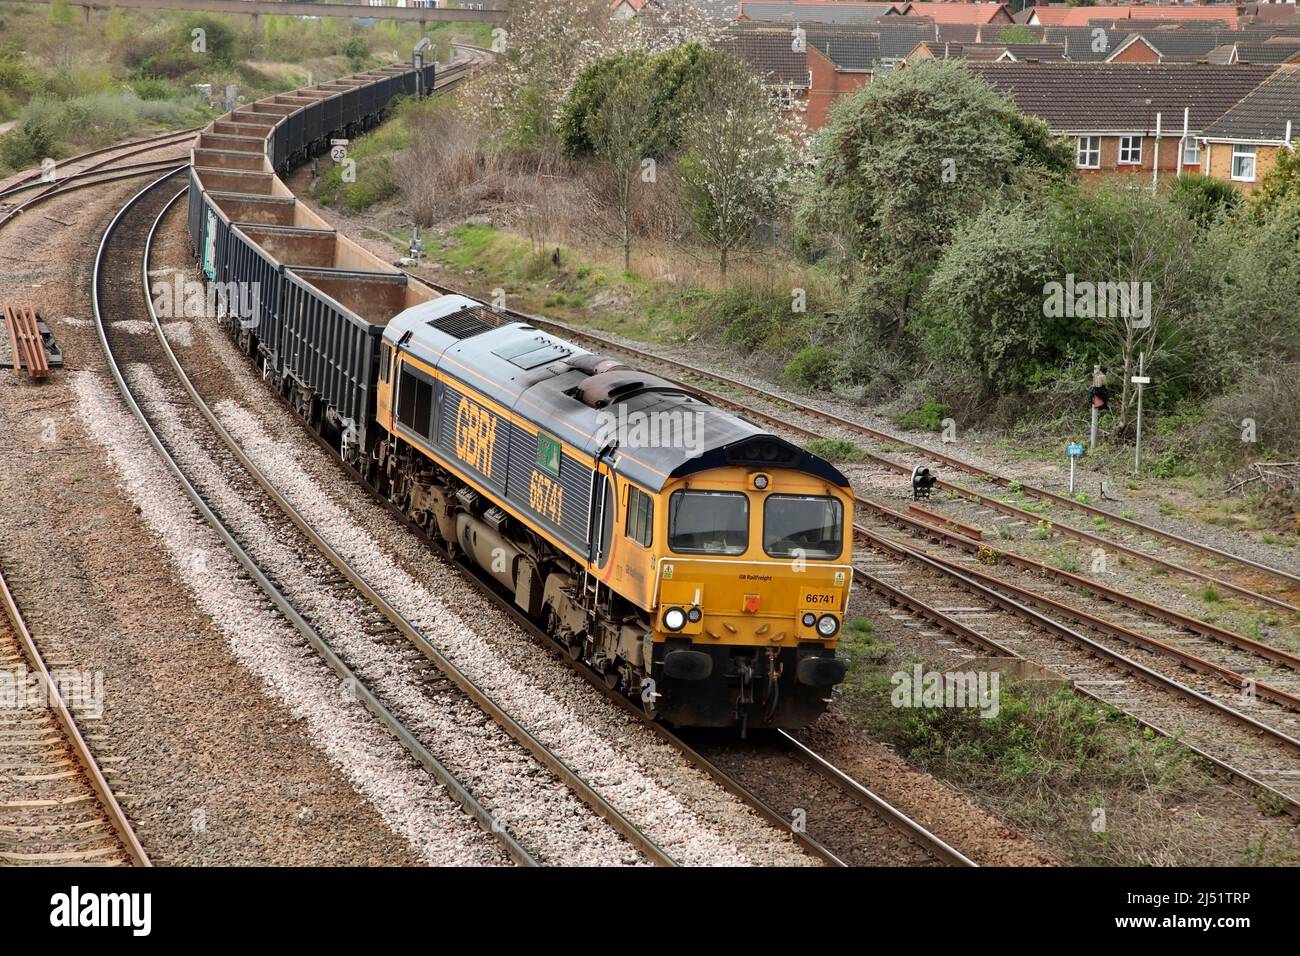 GB Railfreight Class 66 loco 66741 hauls the 6E57 0539 Ferme Park (London) to Scunthorpe Roxby Gullet waste service through Scunthorpe on 19/4/22. Stock Photo